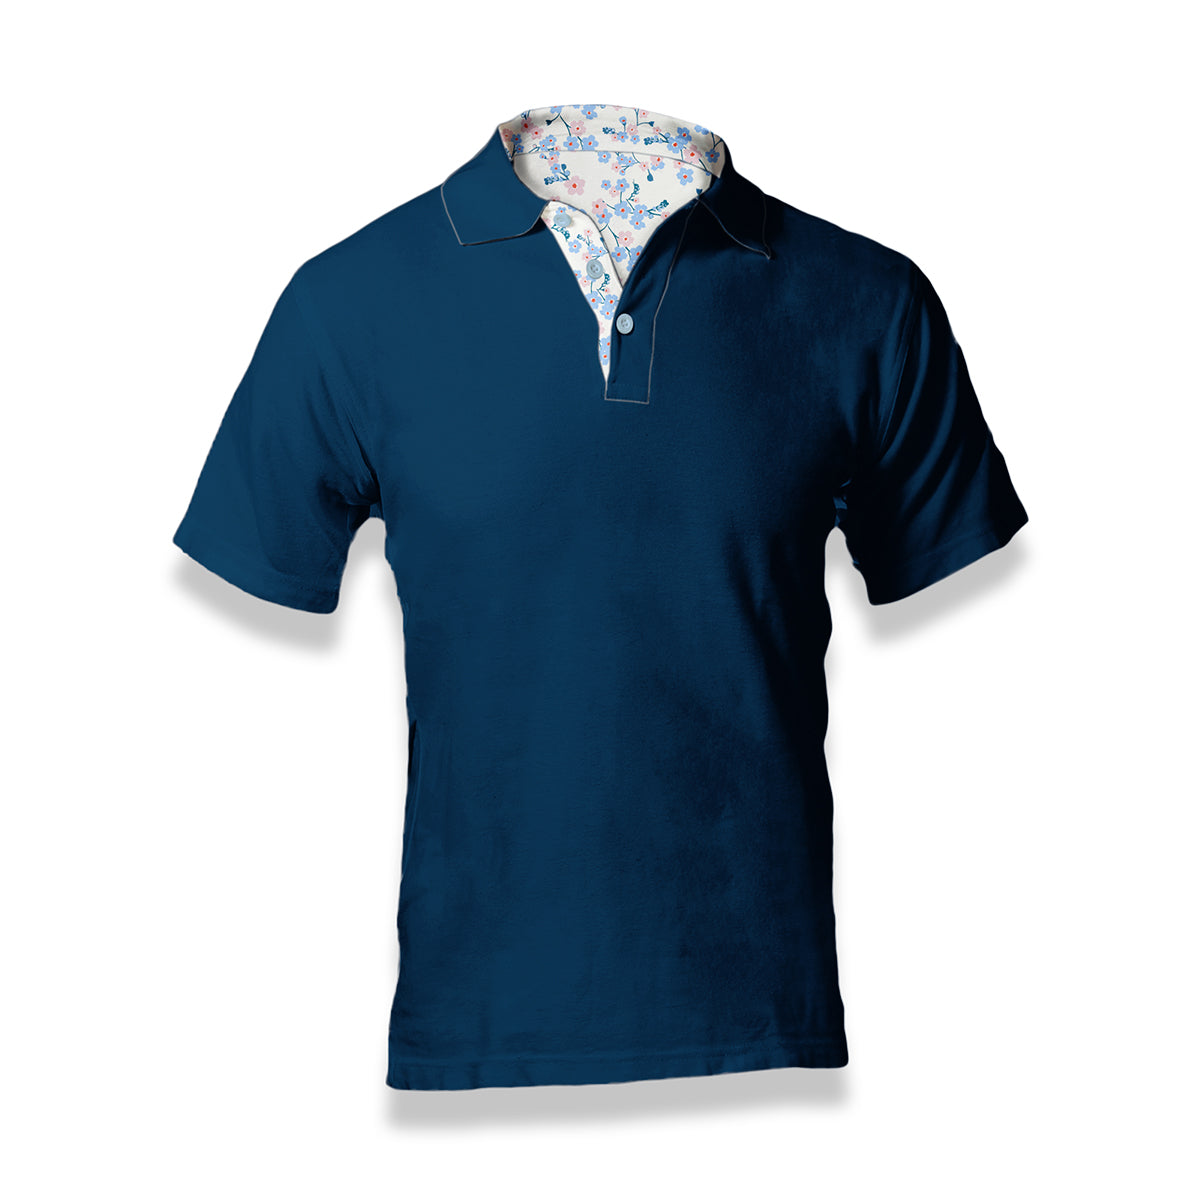 Men's Polo - Solid Pansy 2.0